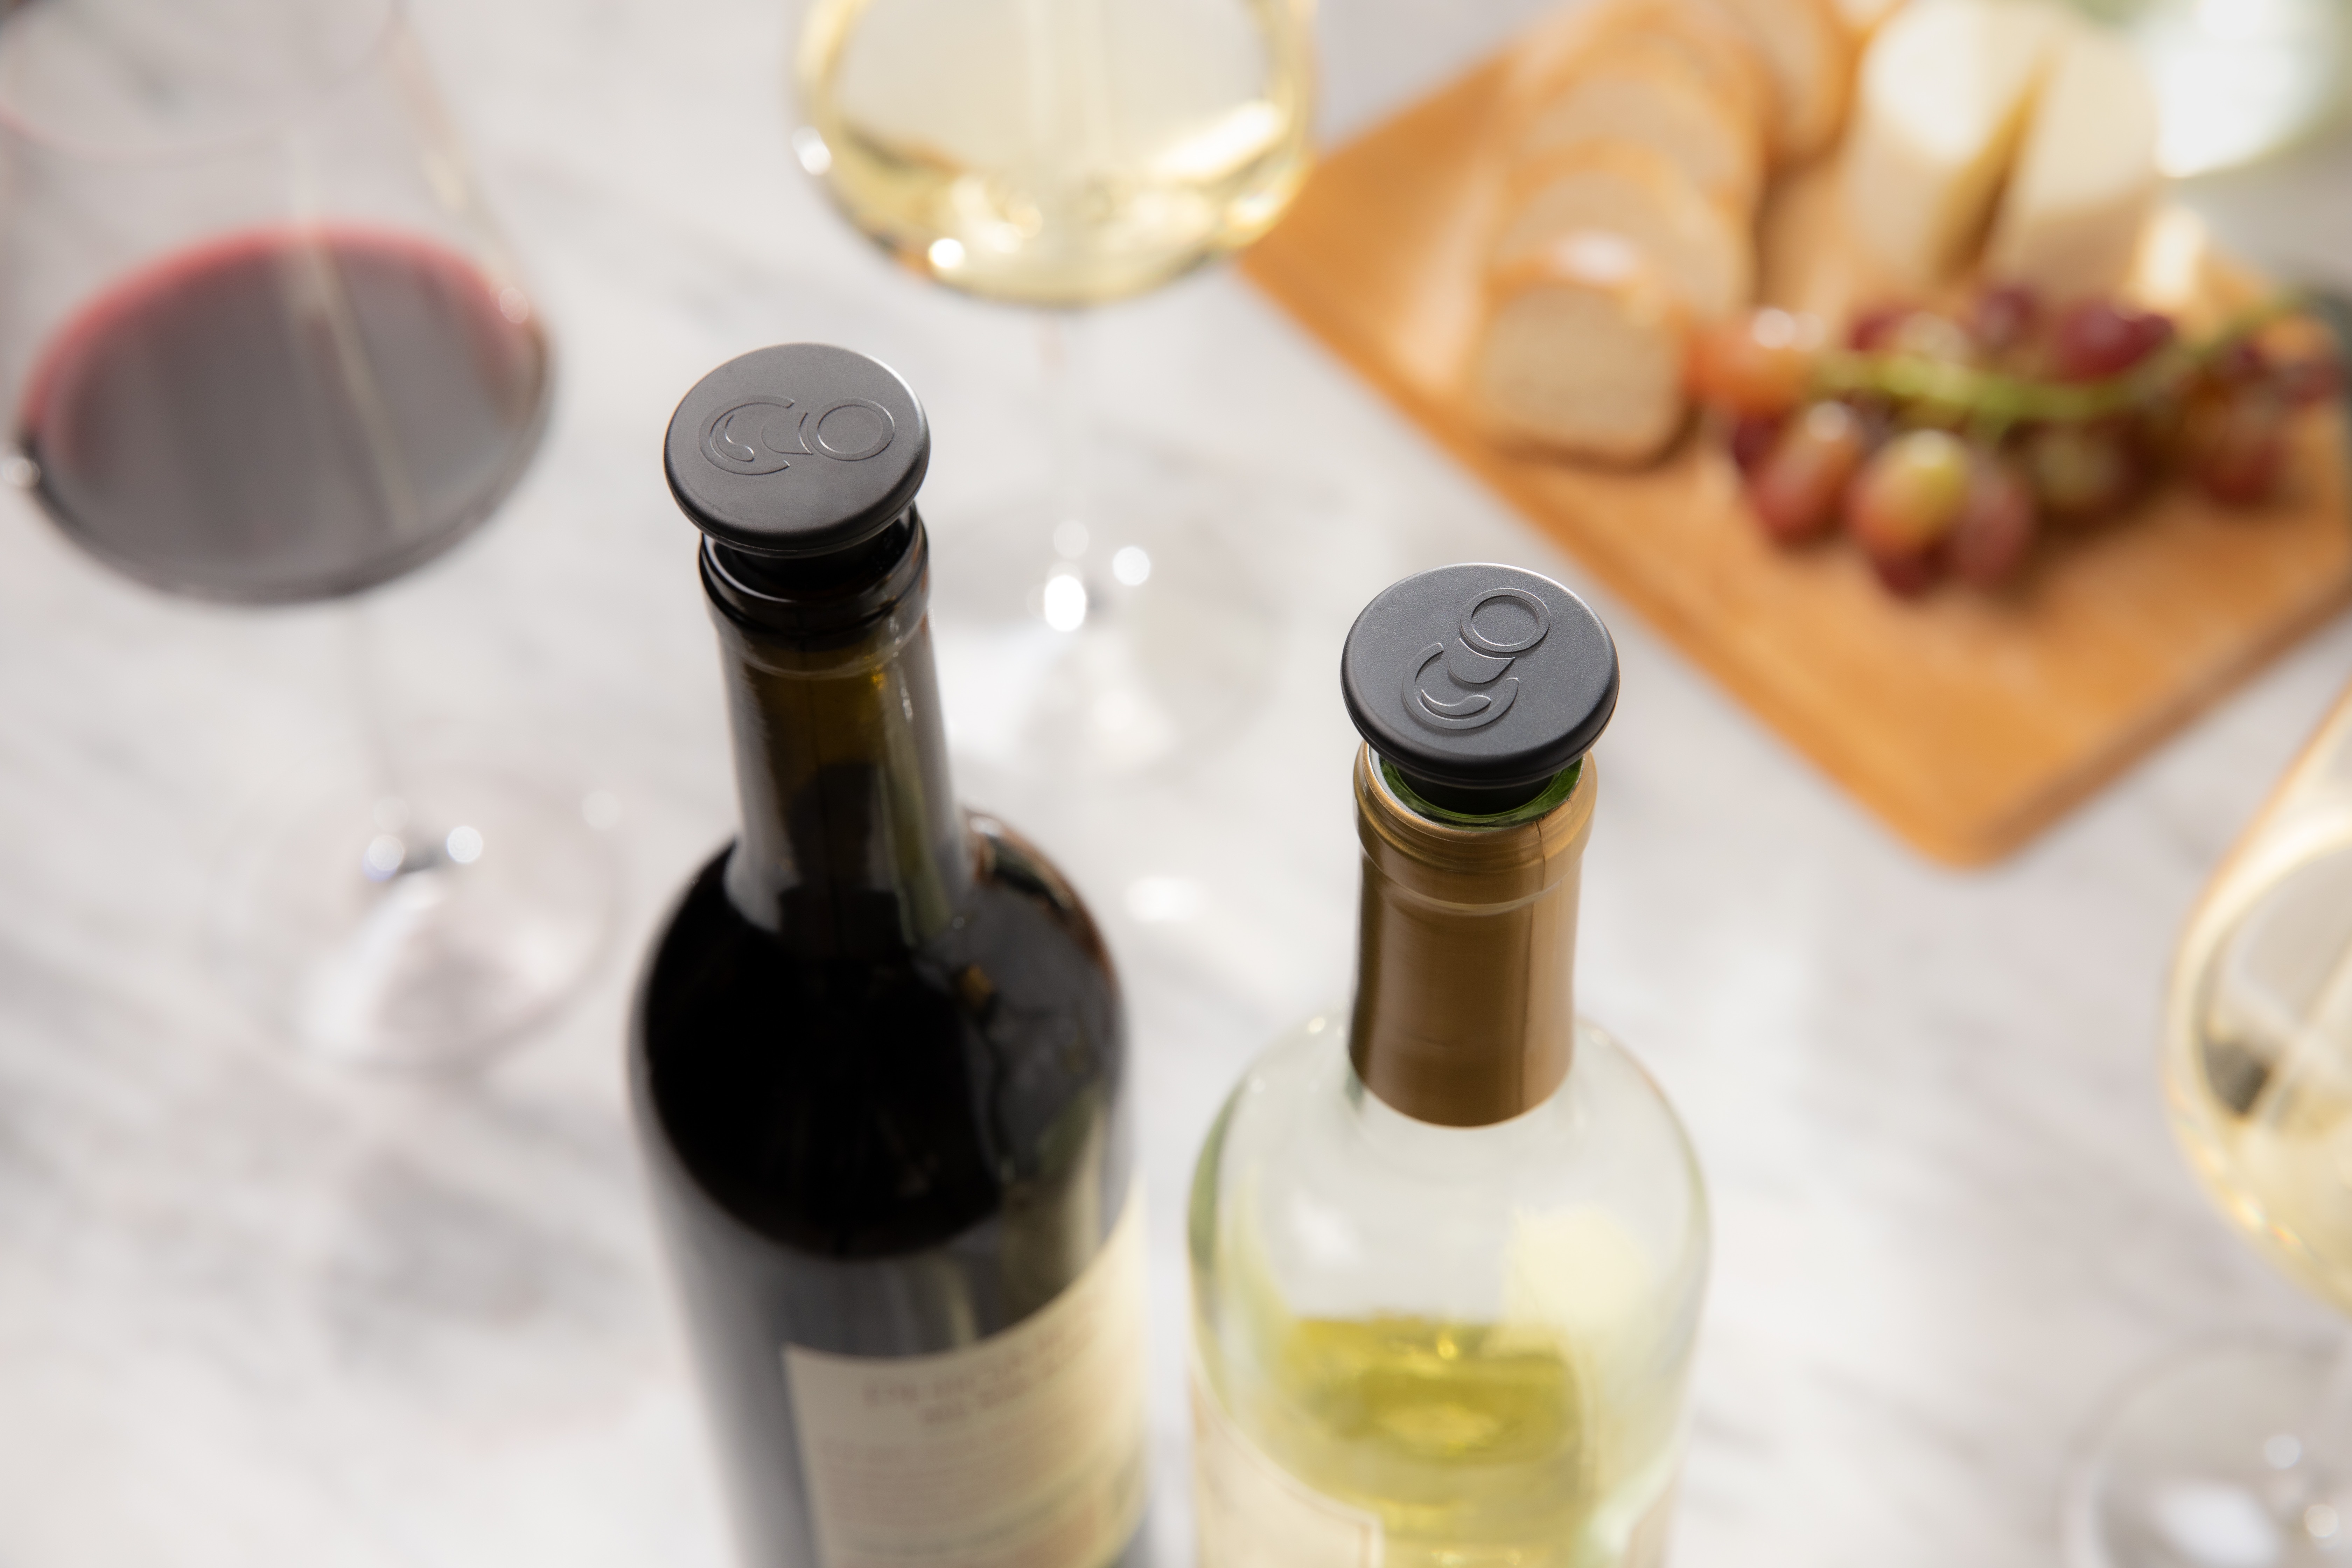 Encork wine preserving stopper actively removes oxygen to keep wine first-pour fresh.